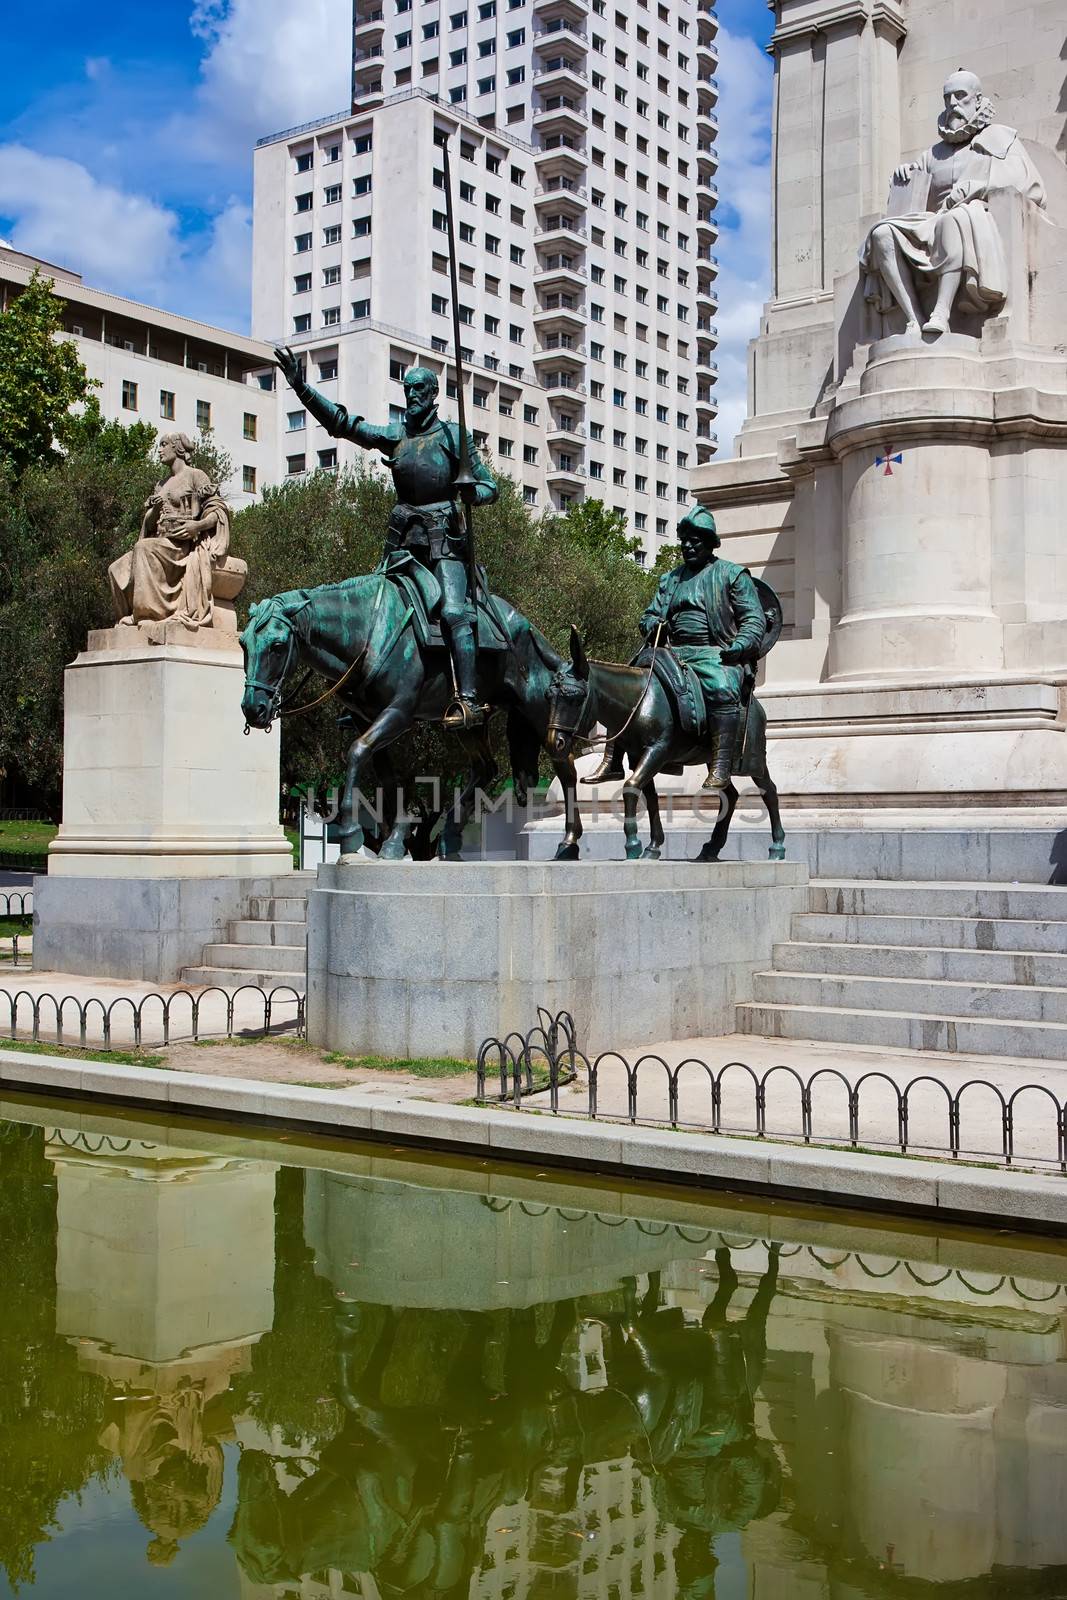 Statue of Spanish writer Miguel Cervantes and his characters Don Quichote with Sancho Panza, Madrid, Spain